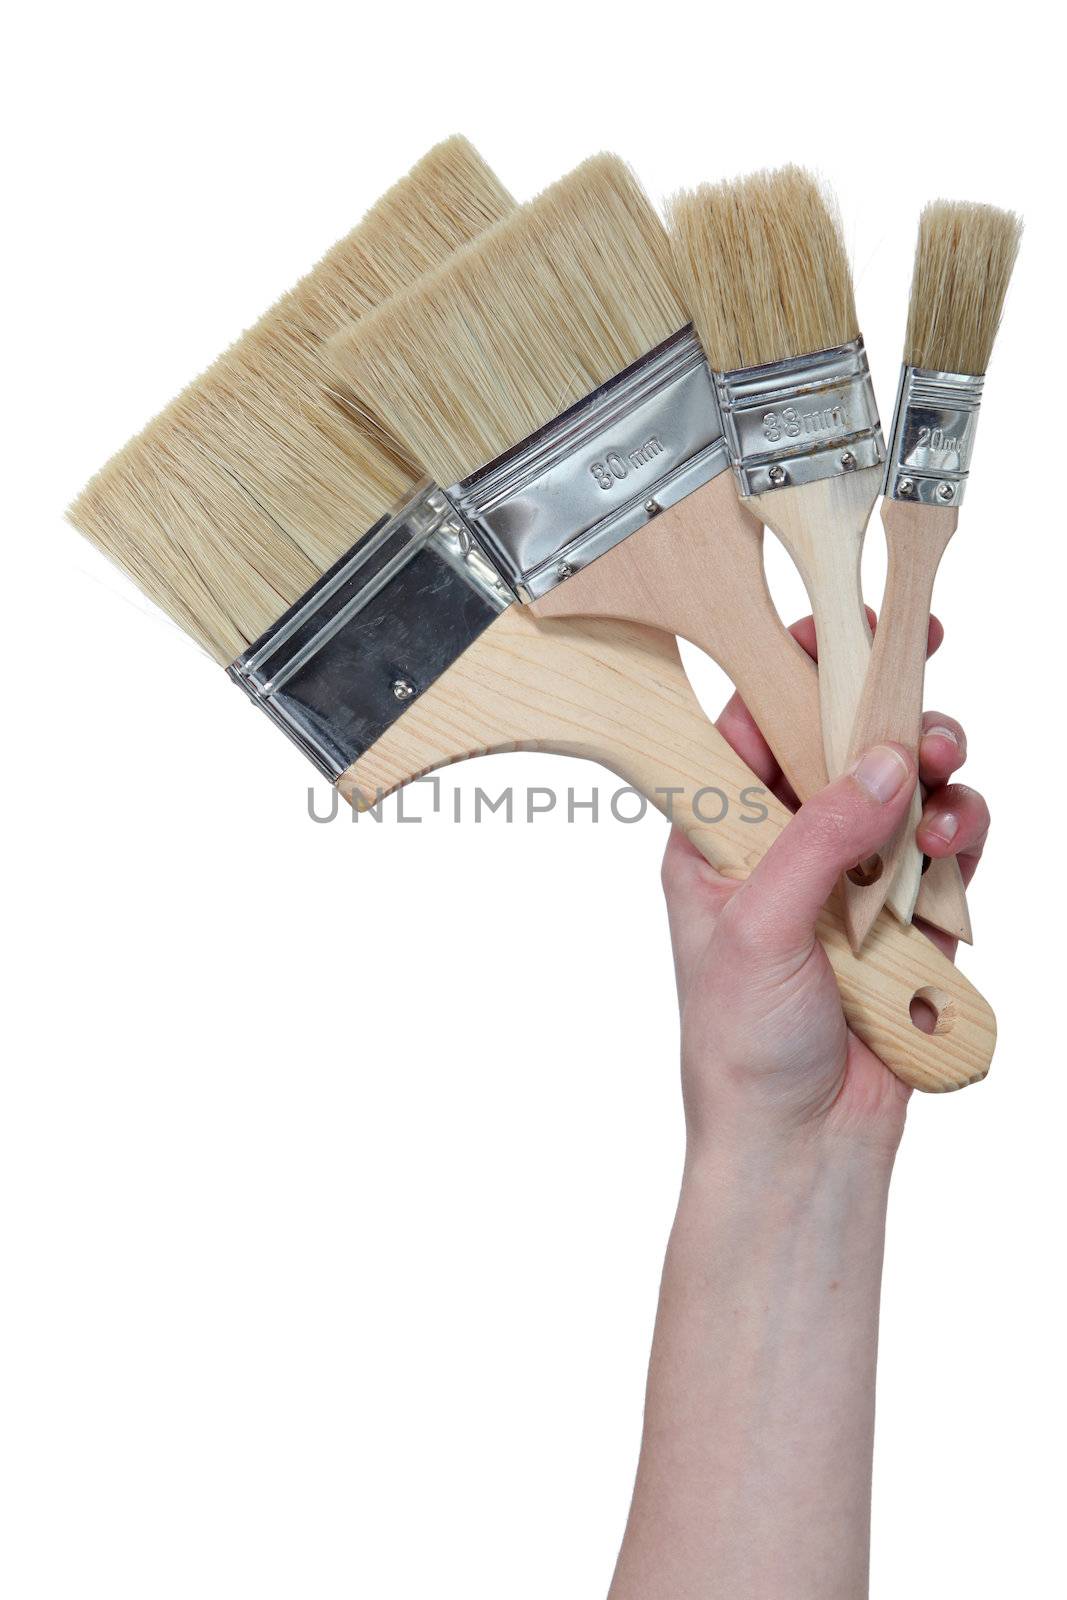 A set of paintbrushes by phovoir